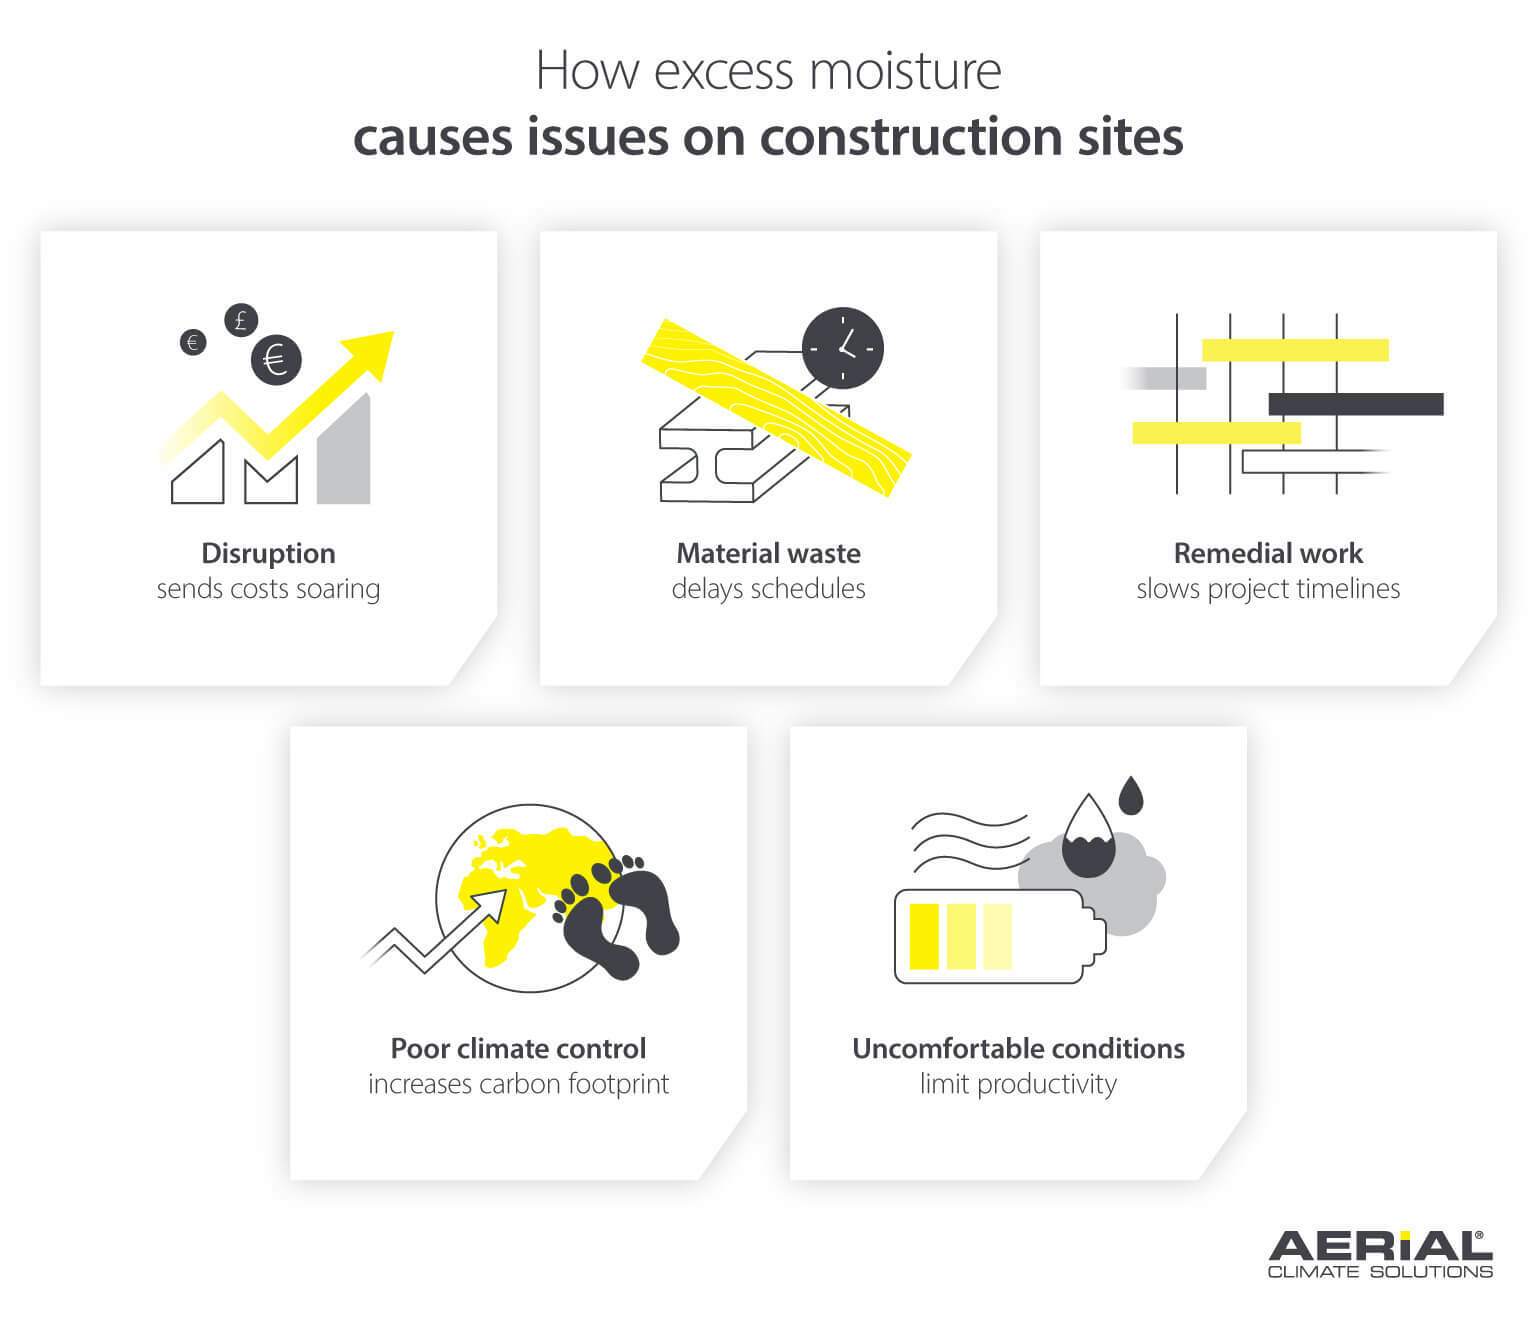 How humidity and excess moisture causes issues on construction sites - Infographic image